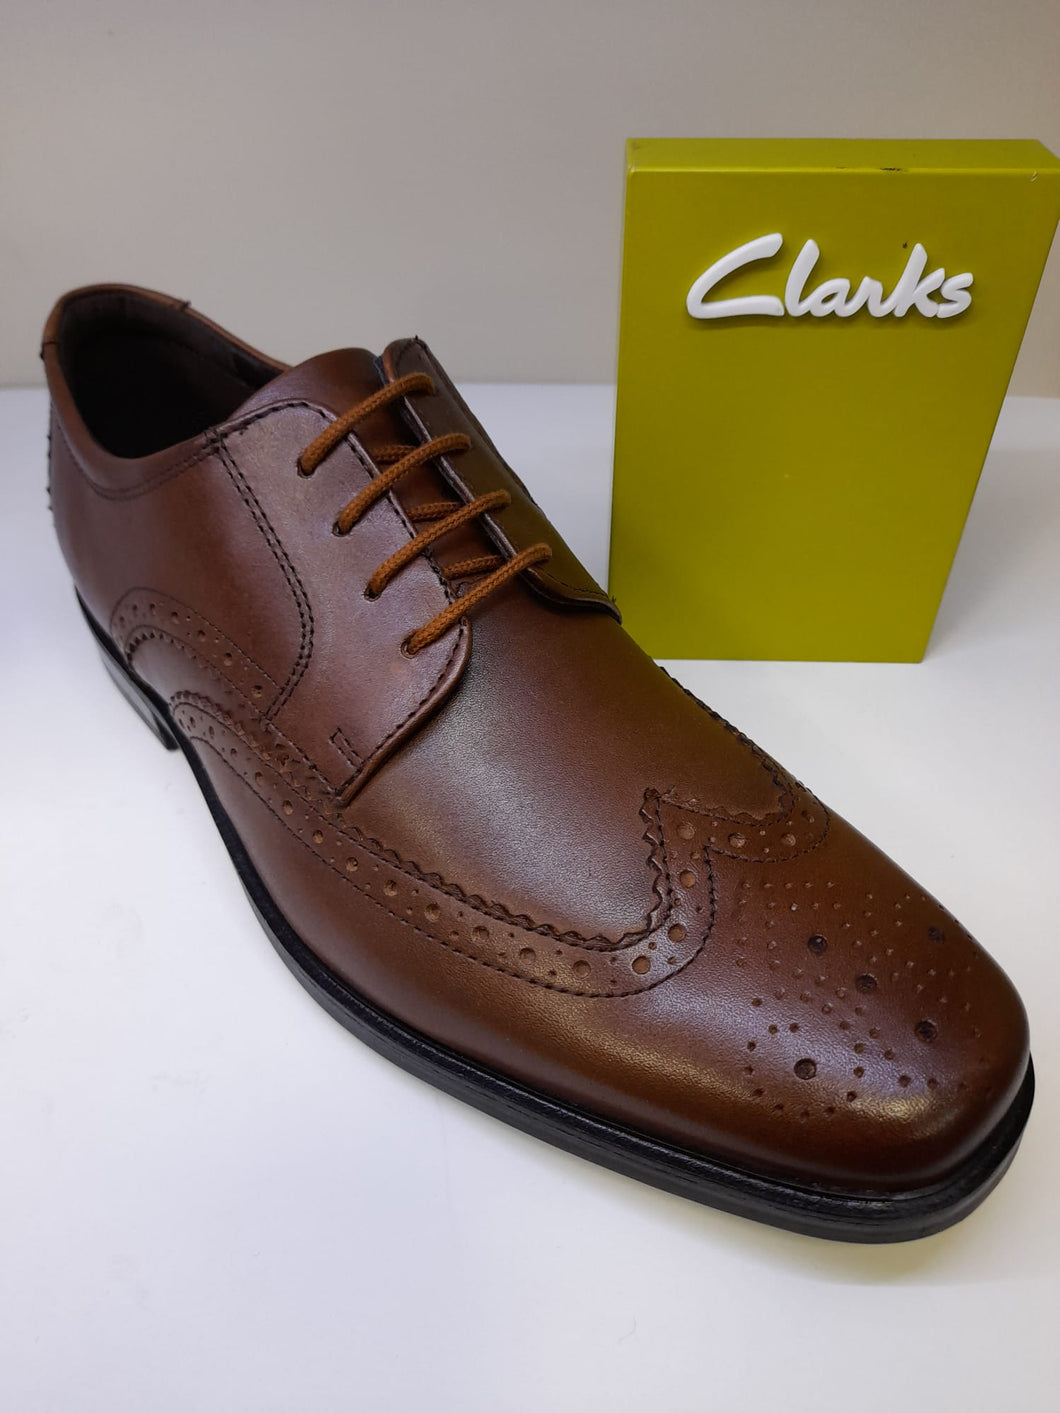 Clarks Men's Dark Tan Leather Brogue - Laced Shoe - Howard Wing - G Fit